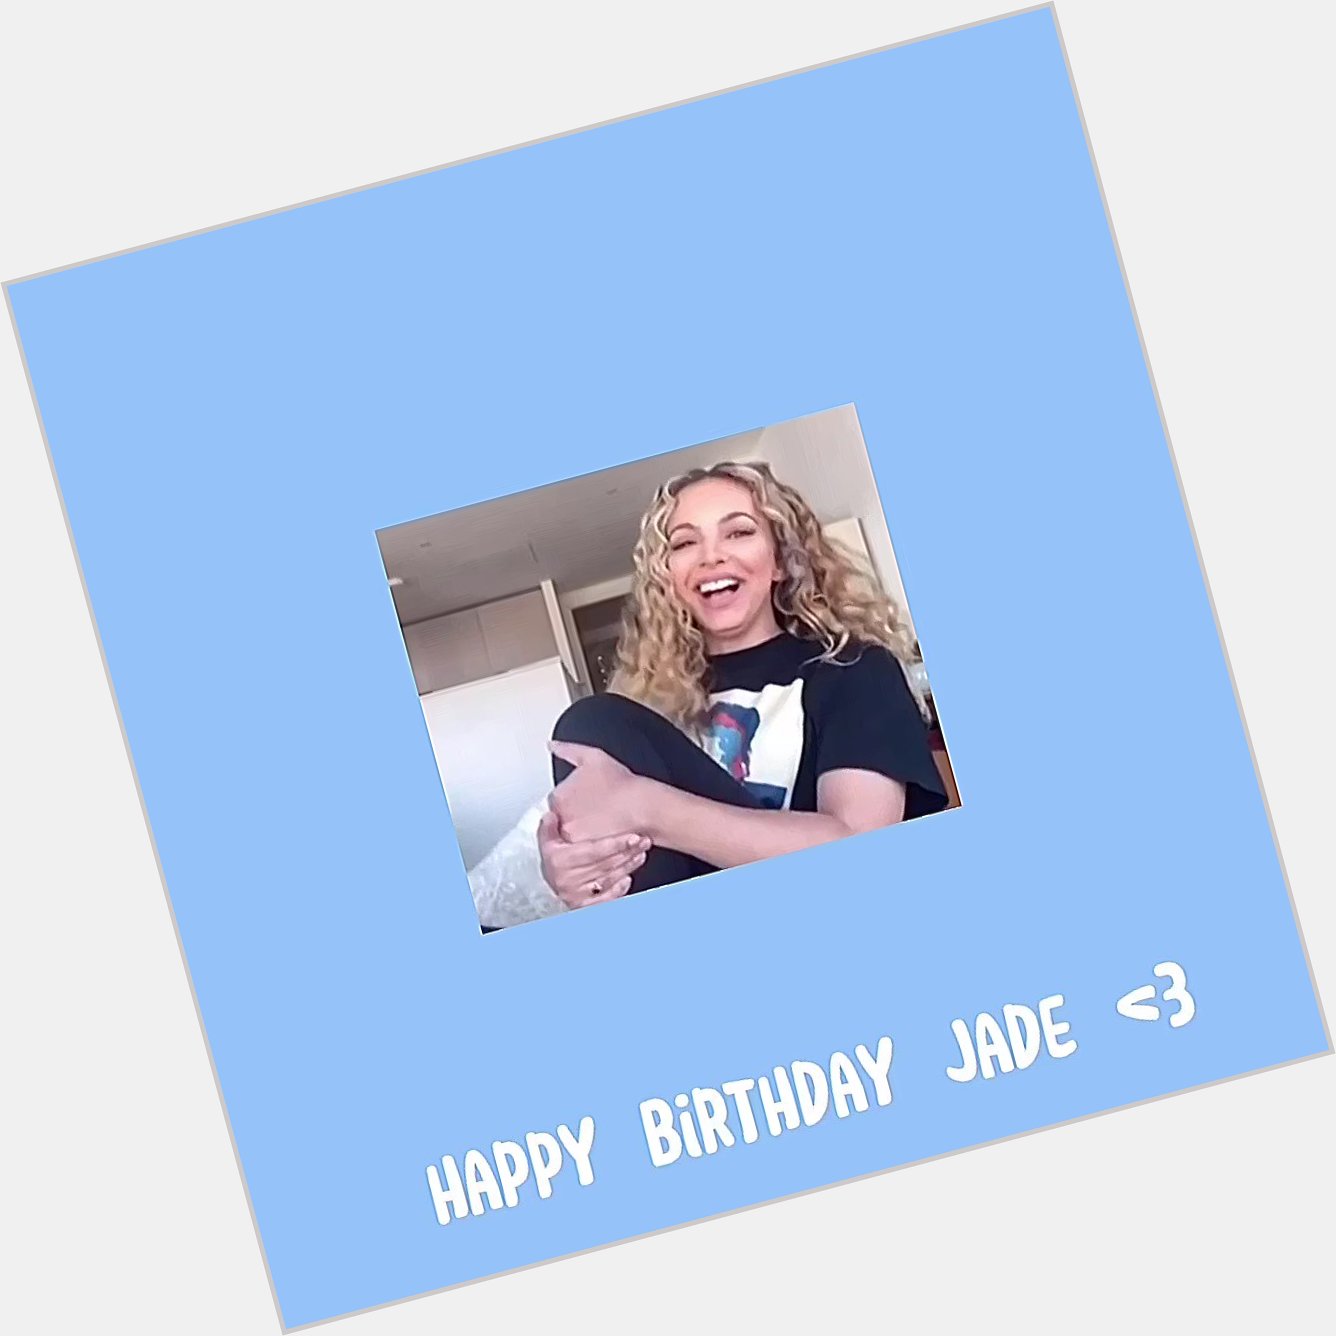 Happy birthday jade 29th little mix jade thirlwall ot3 edit happy face to face song 